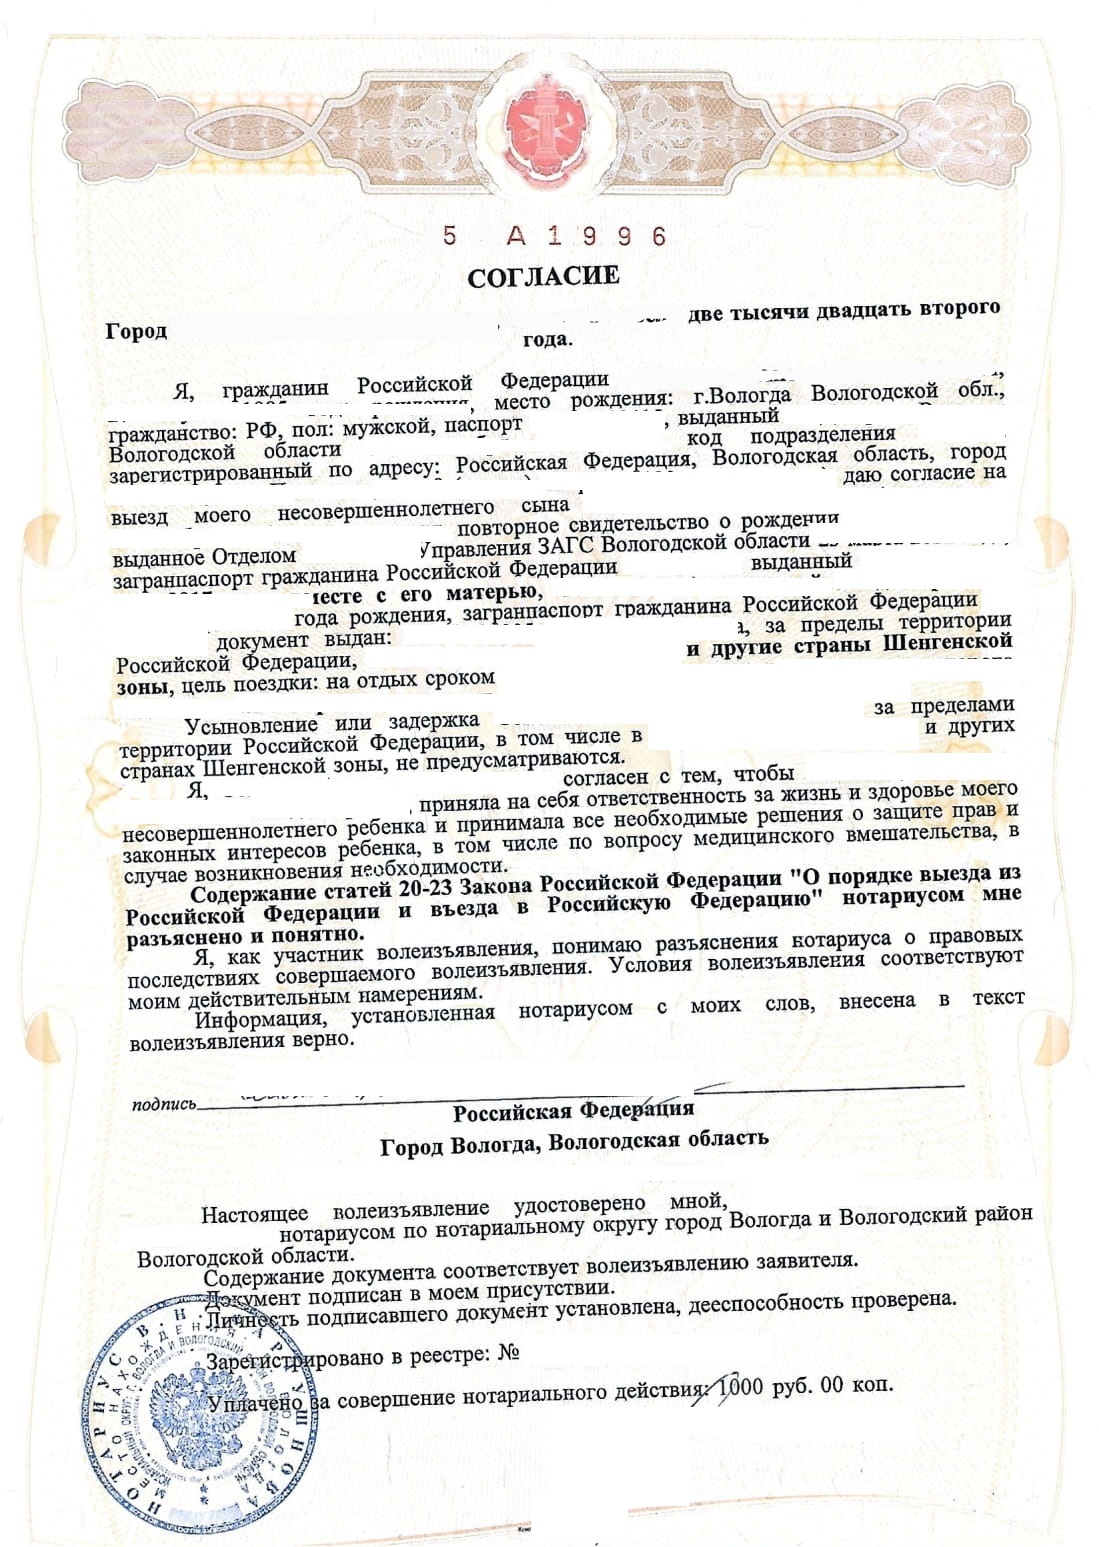 Russian translation of permission for the UK Home Office